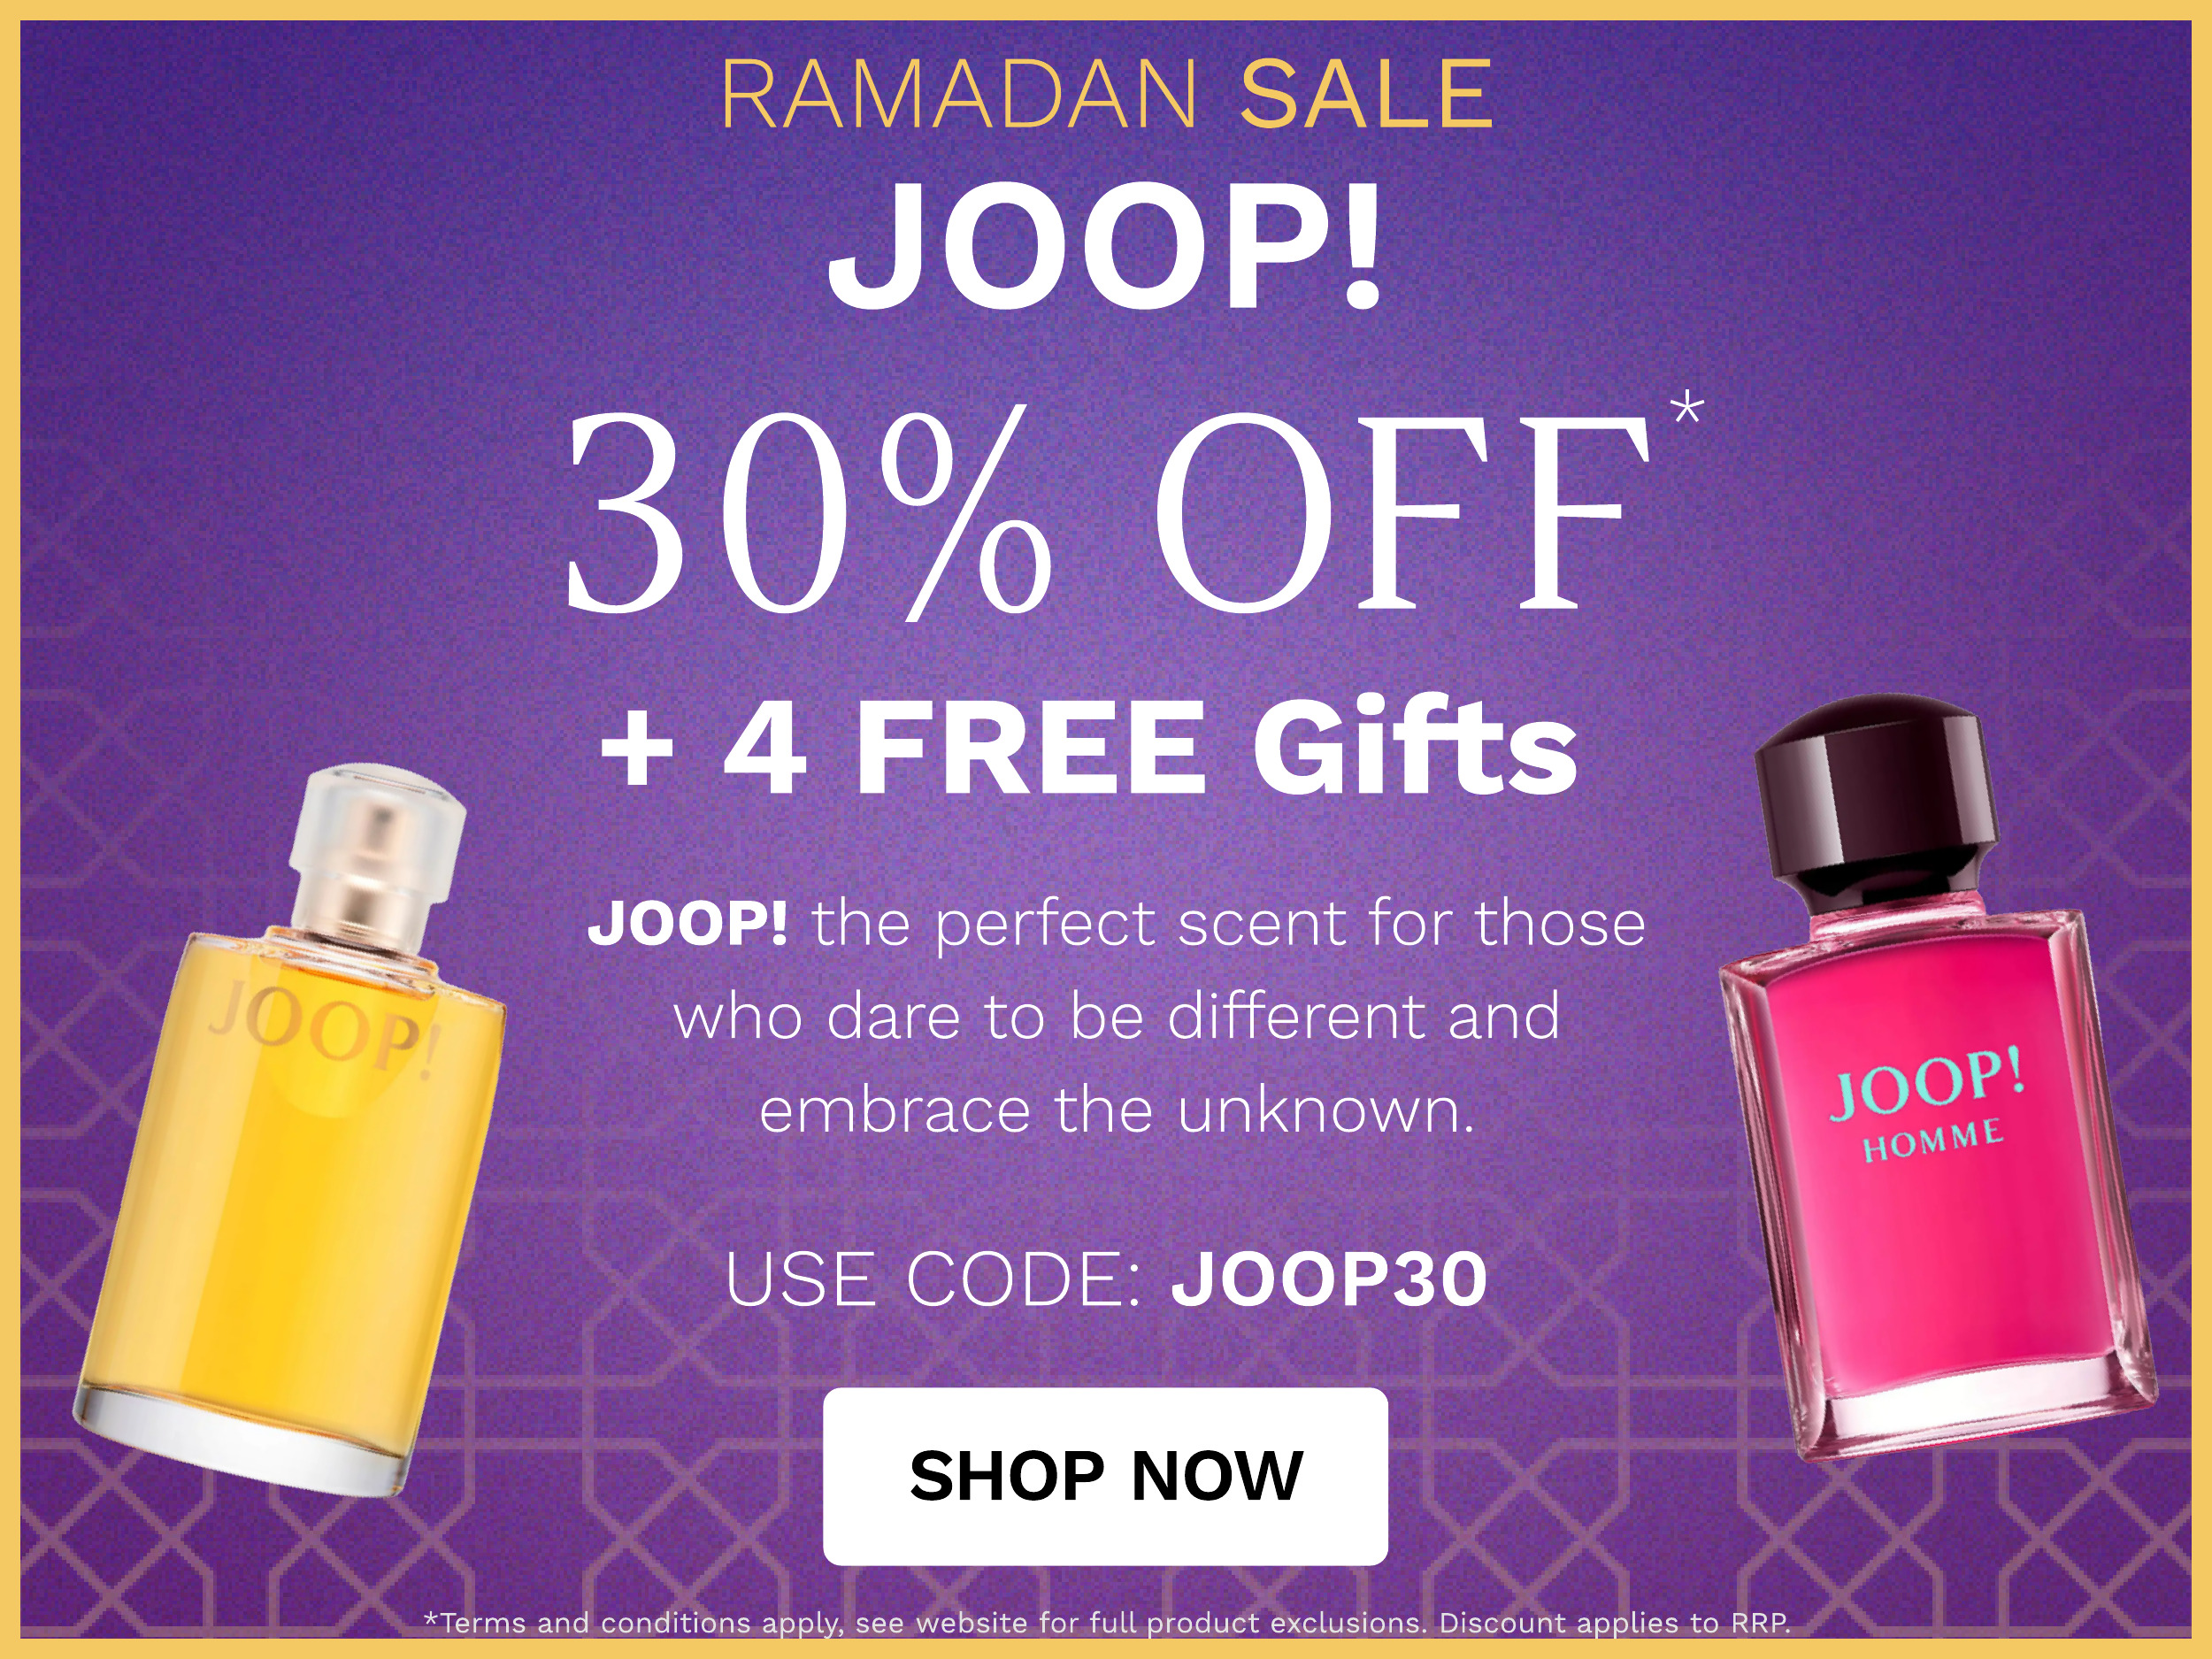 RAMADAN SALE JOOP! 30% OFF 4 FREE Gifts JOOP! the perfect scent for those who dare to be different and embrace the unknown. USE CODE: JOOP30 SHOP NOW apply, see website for full product exclusions 